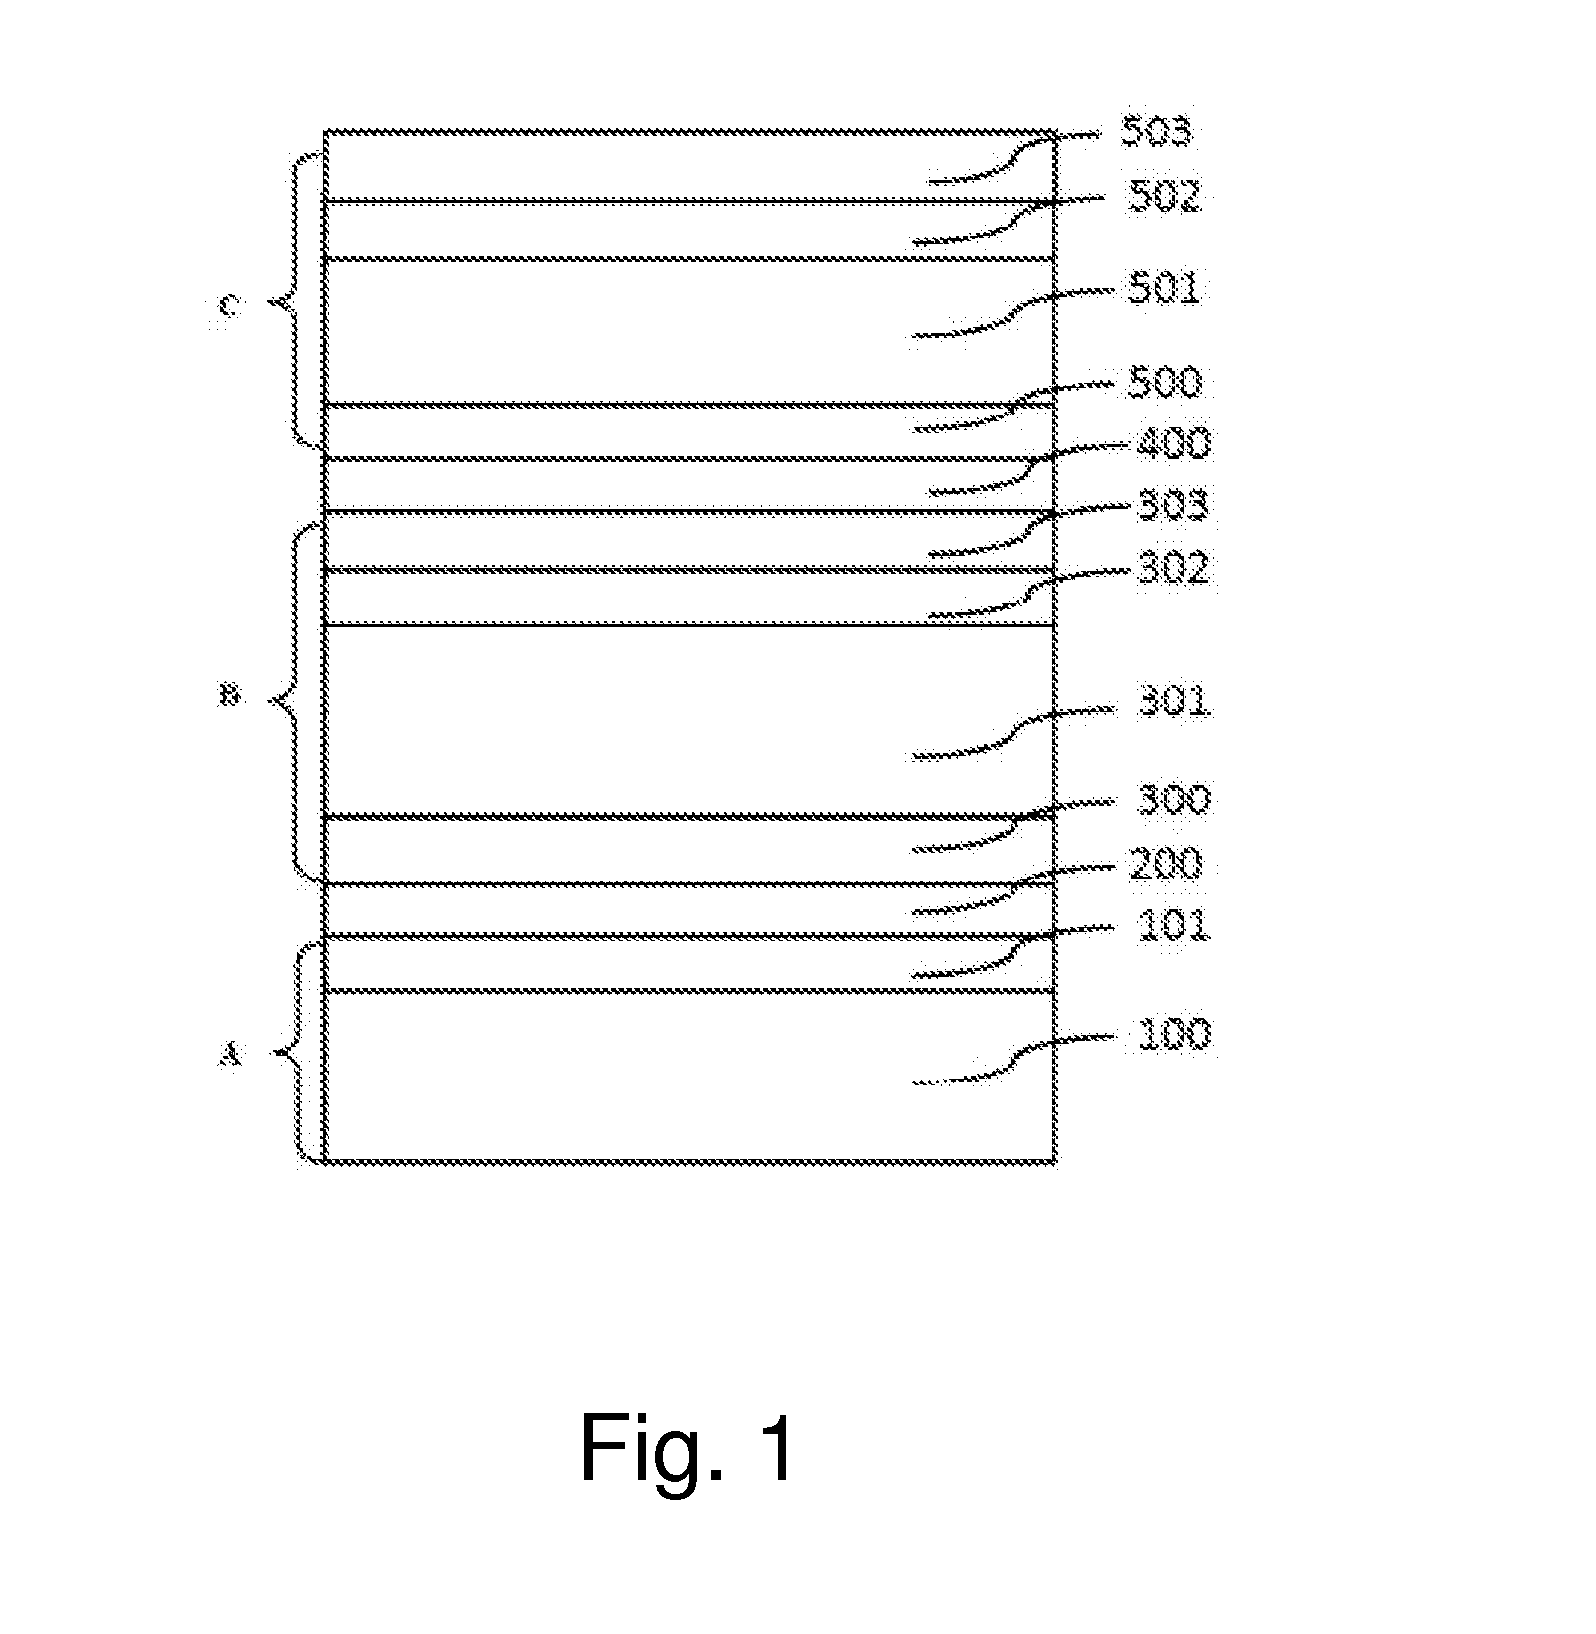 High-concentration multi-junction solar cell and method for fabricating same